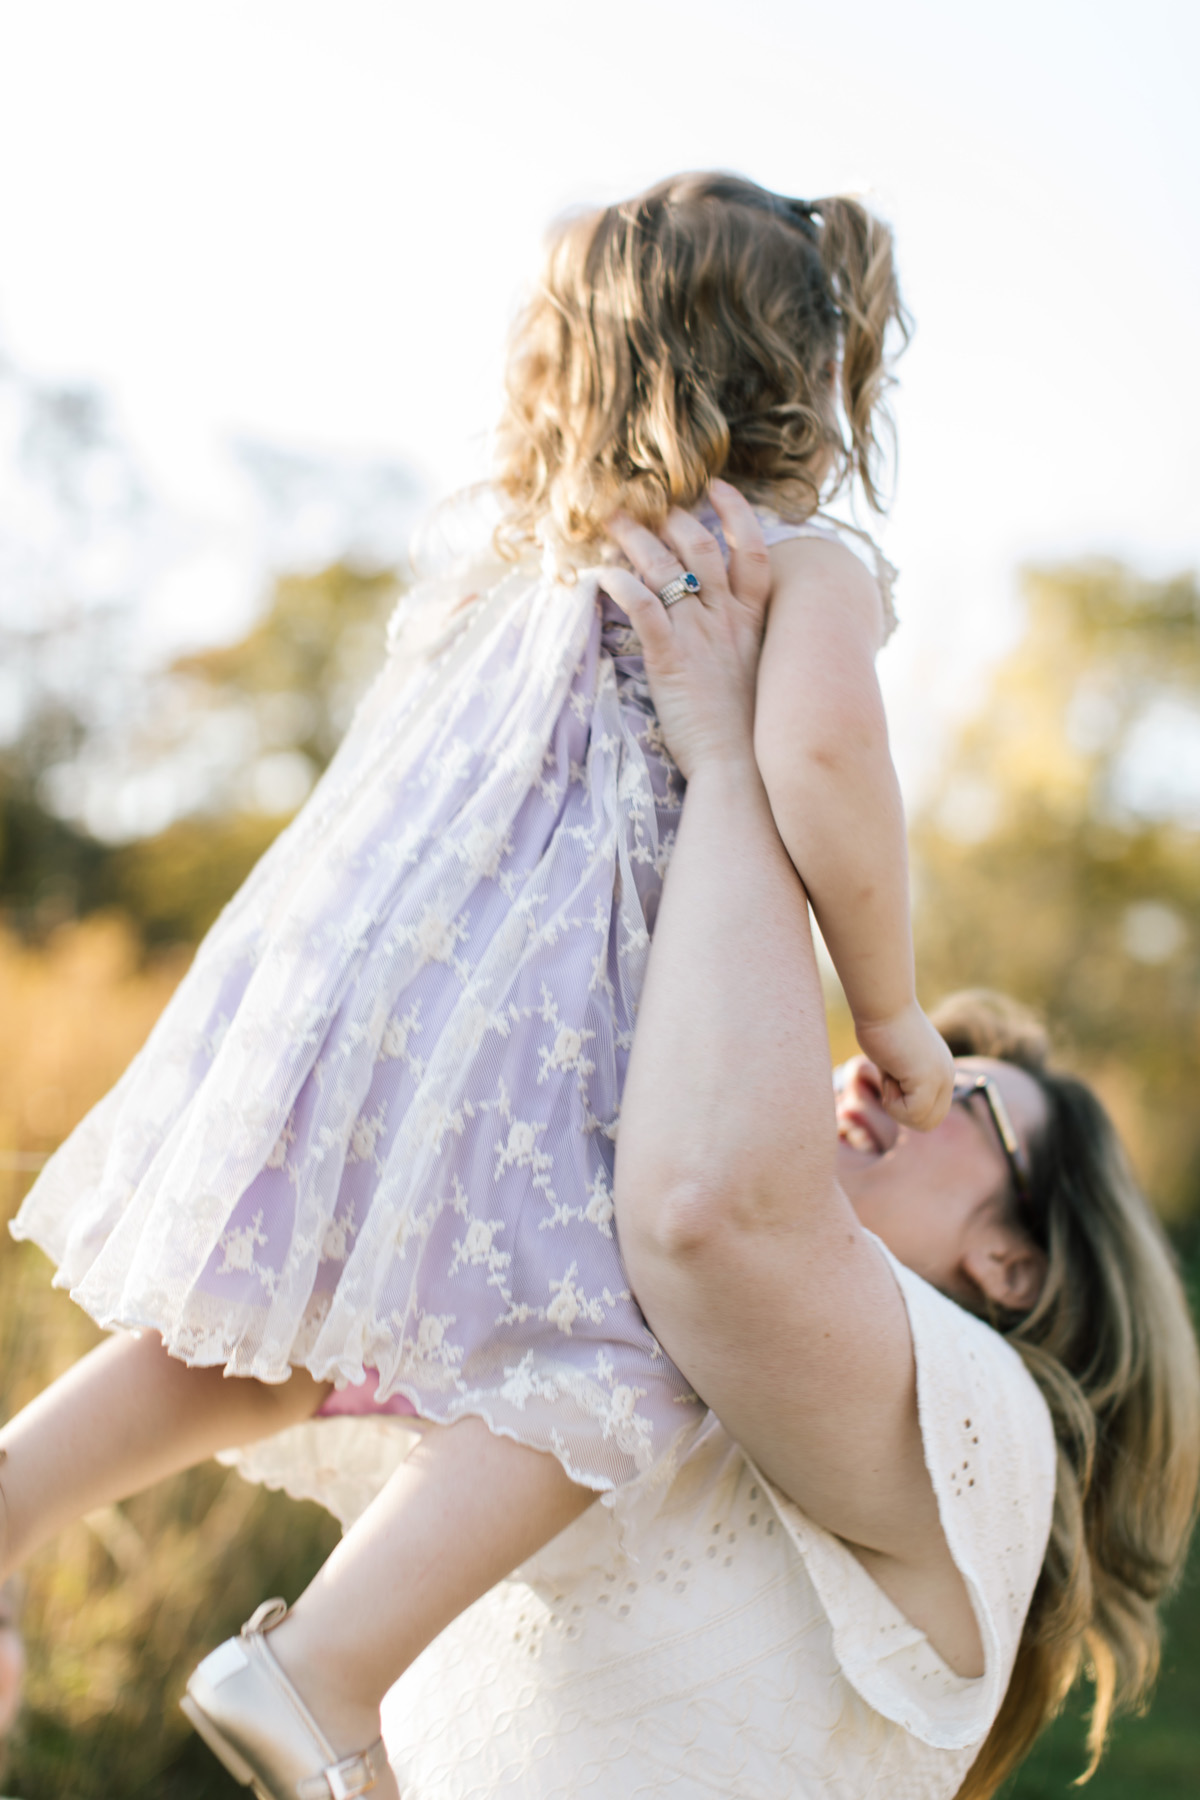 mom lifting her daughter into the air wearing a lilac dress with light all around her